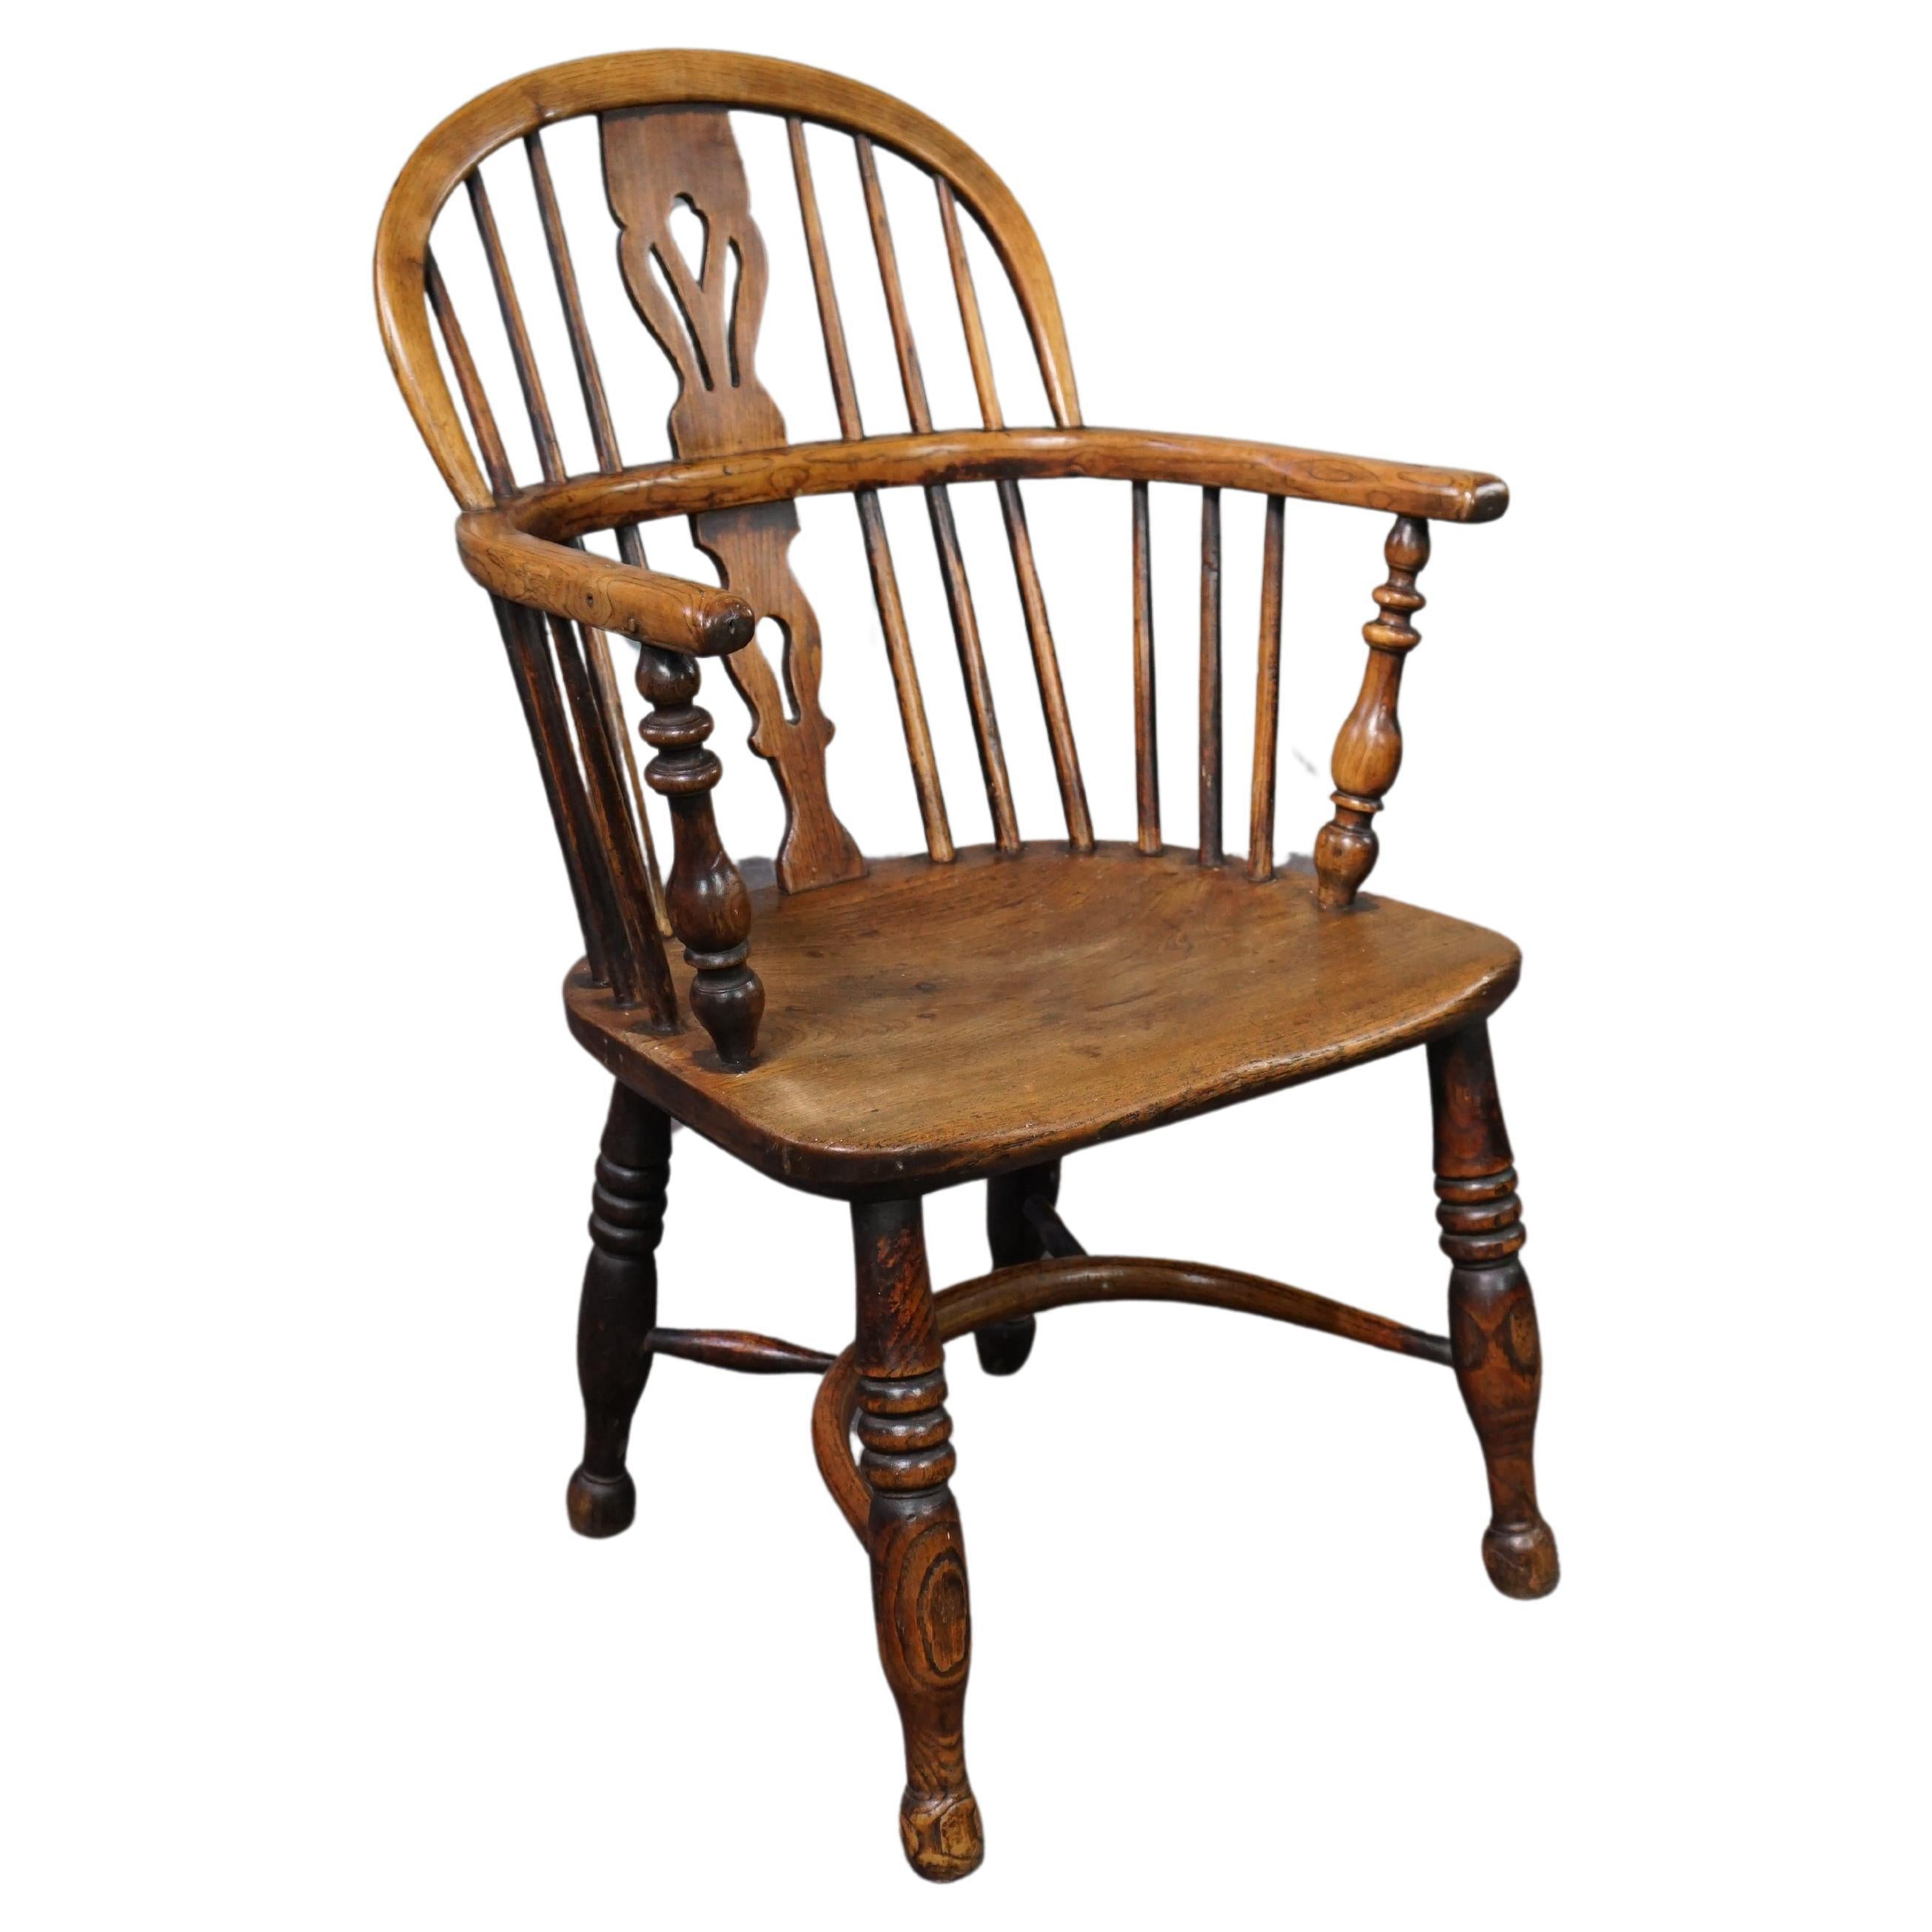 Antique English Windsor chair/armchair, low back, 18th century For Sale